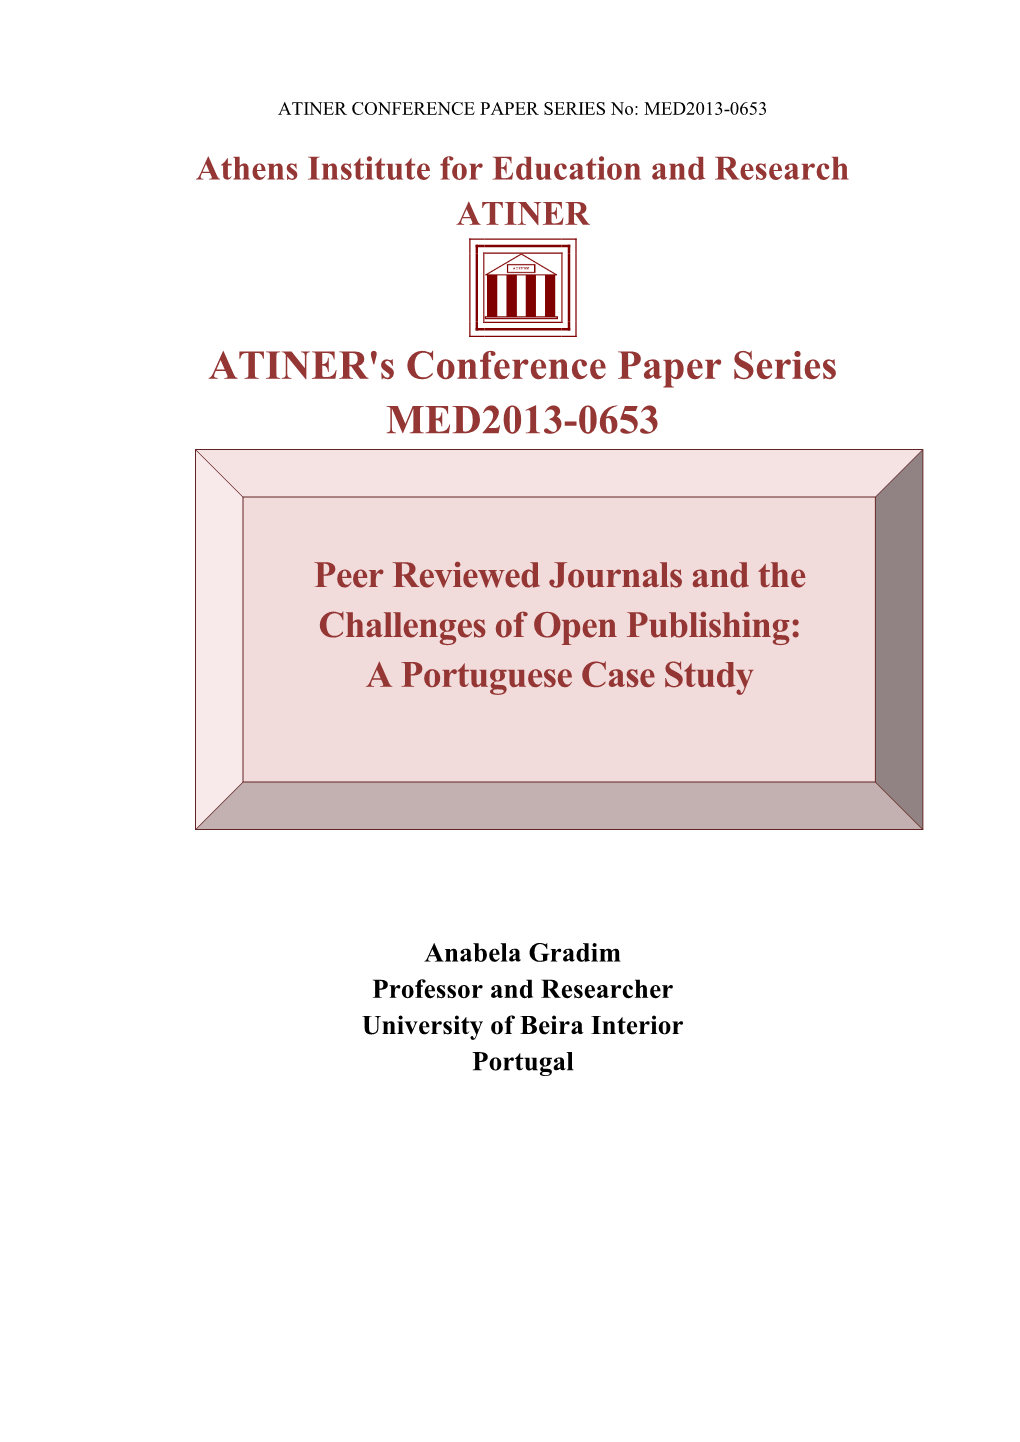 ATINER's Conference Paper Series MED2013-0653